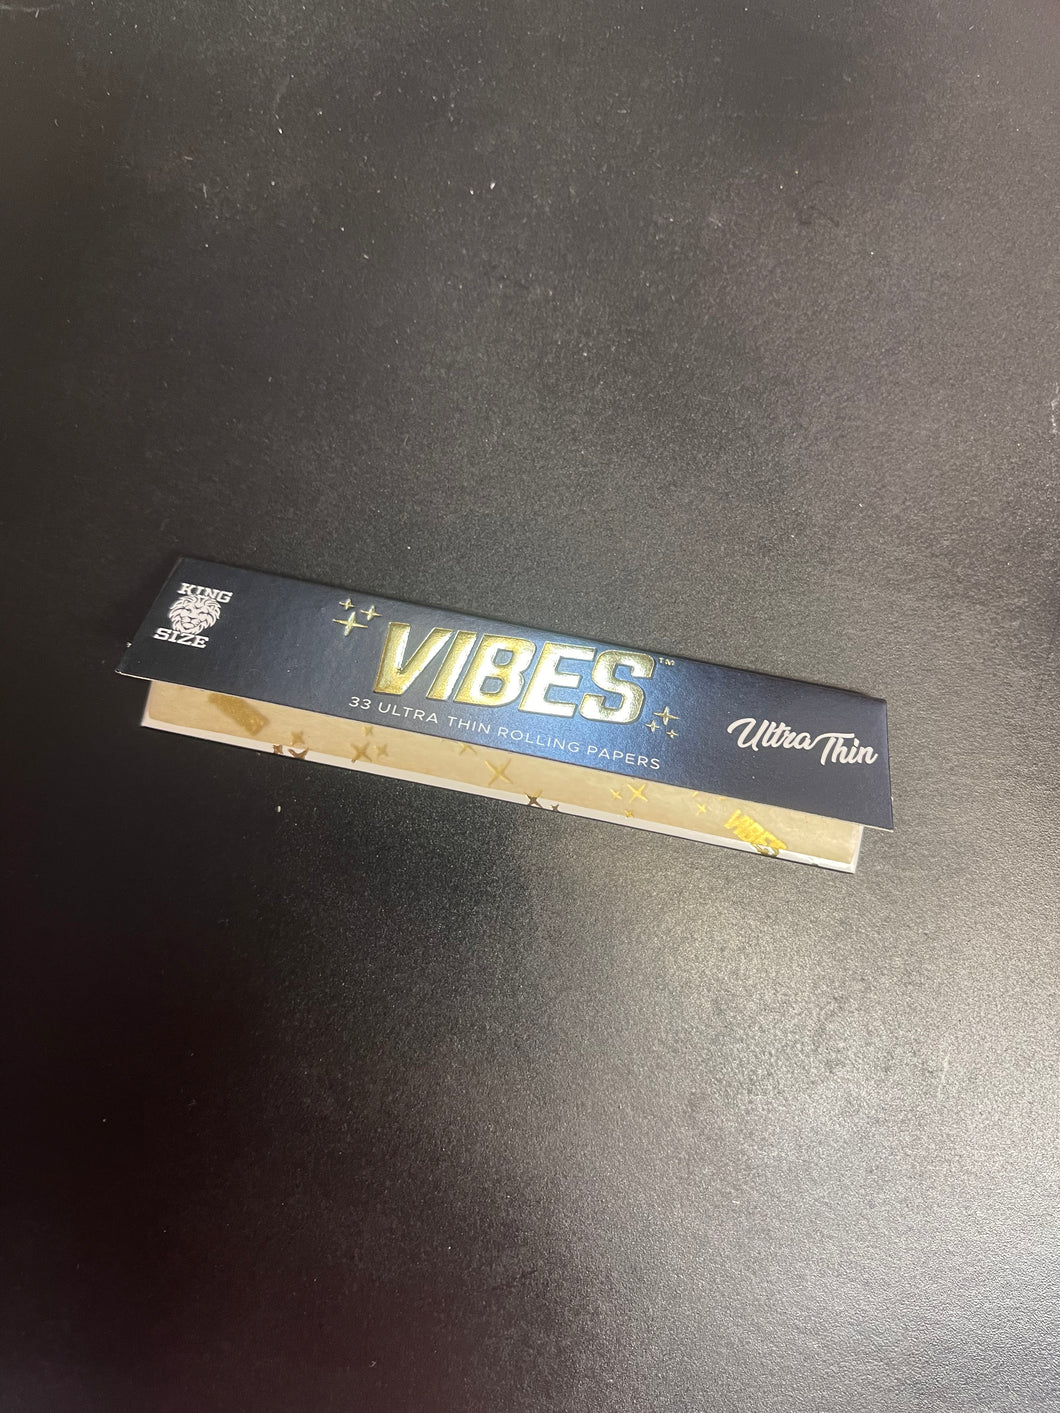 Vibes Ultra Thin King Size papers